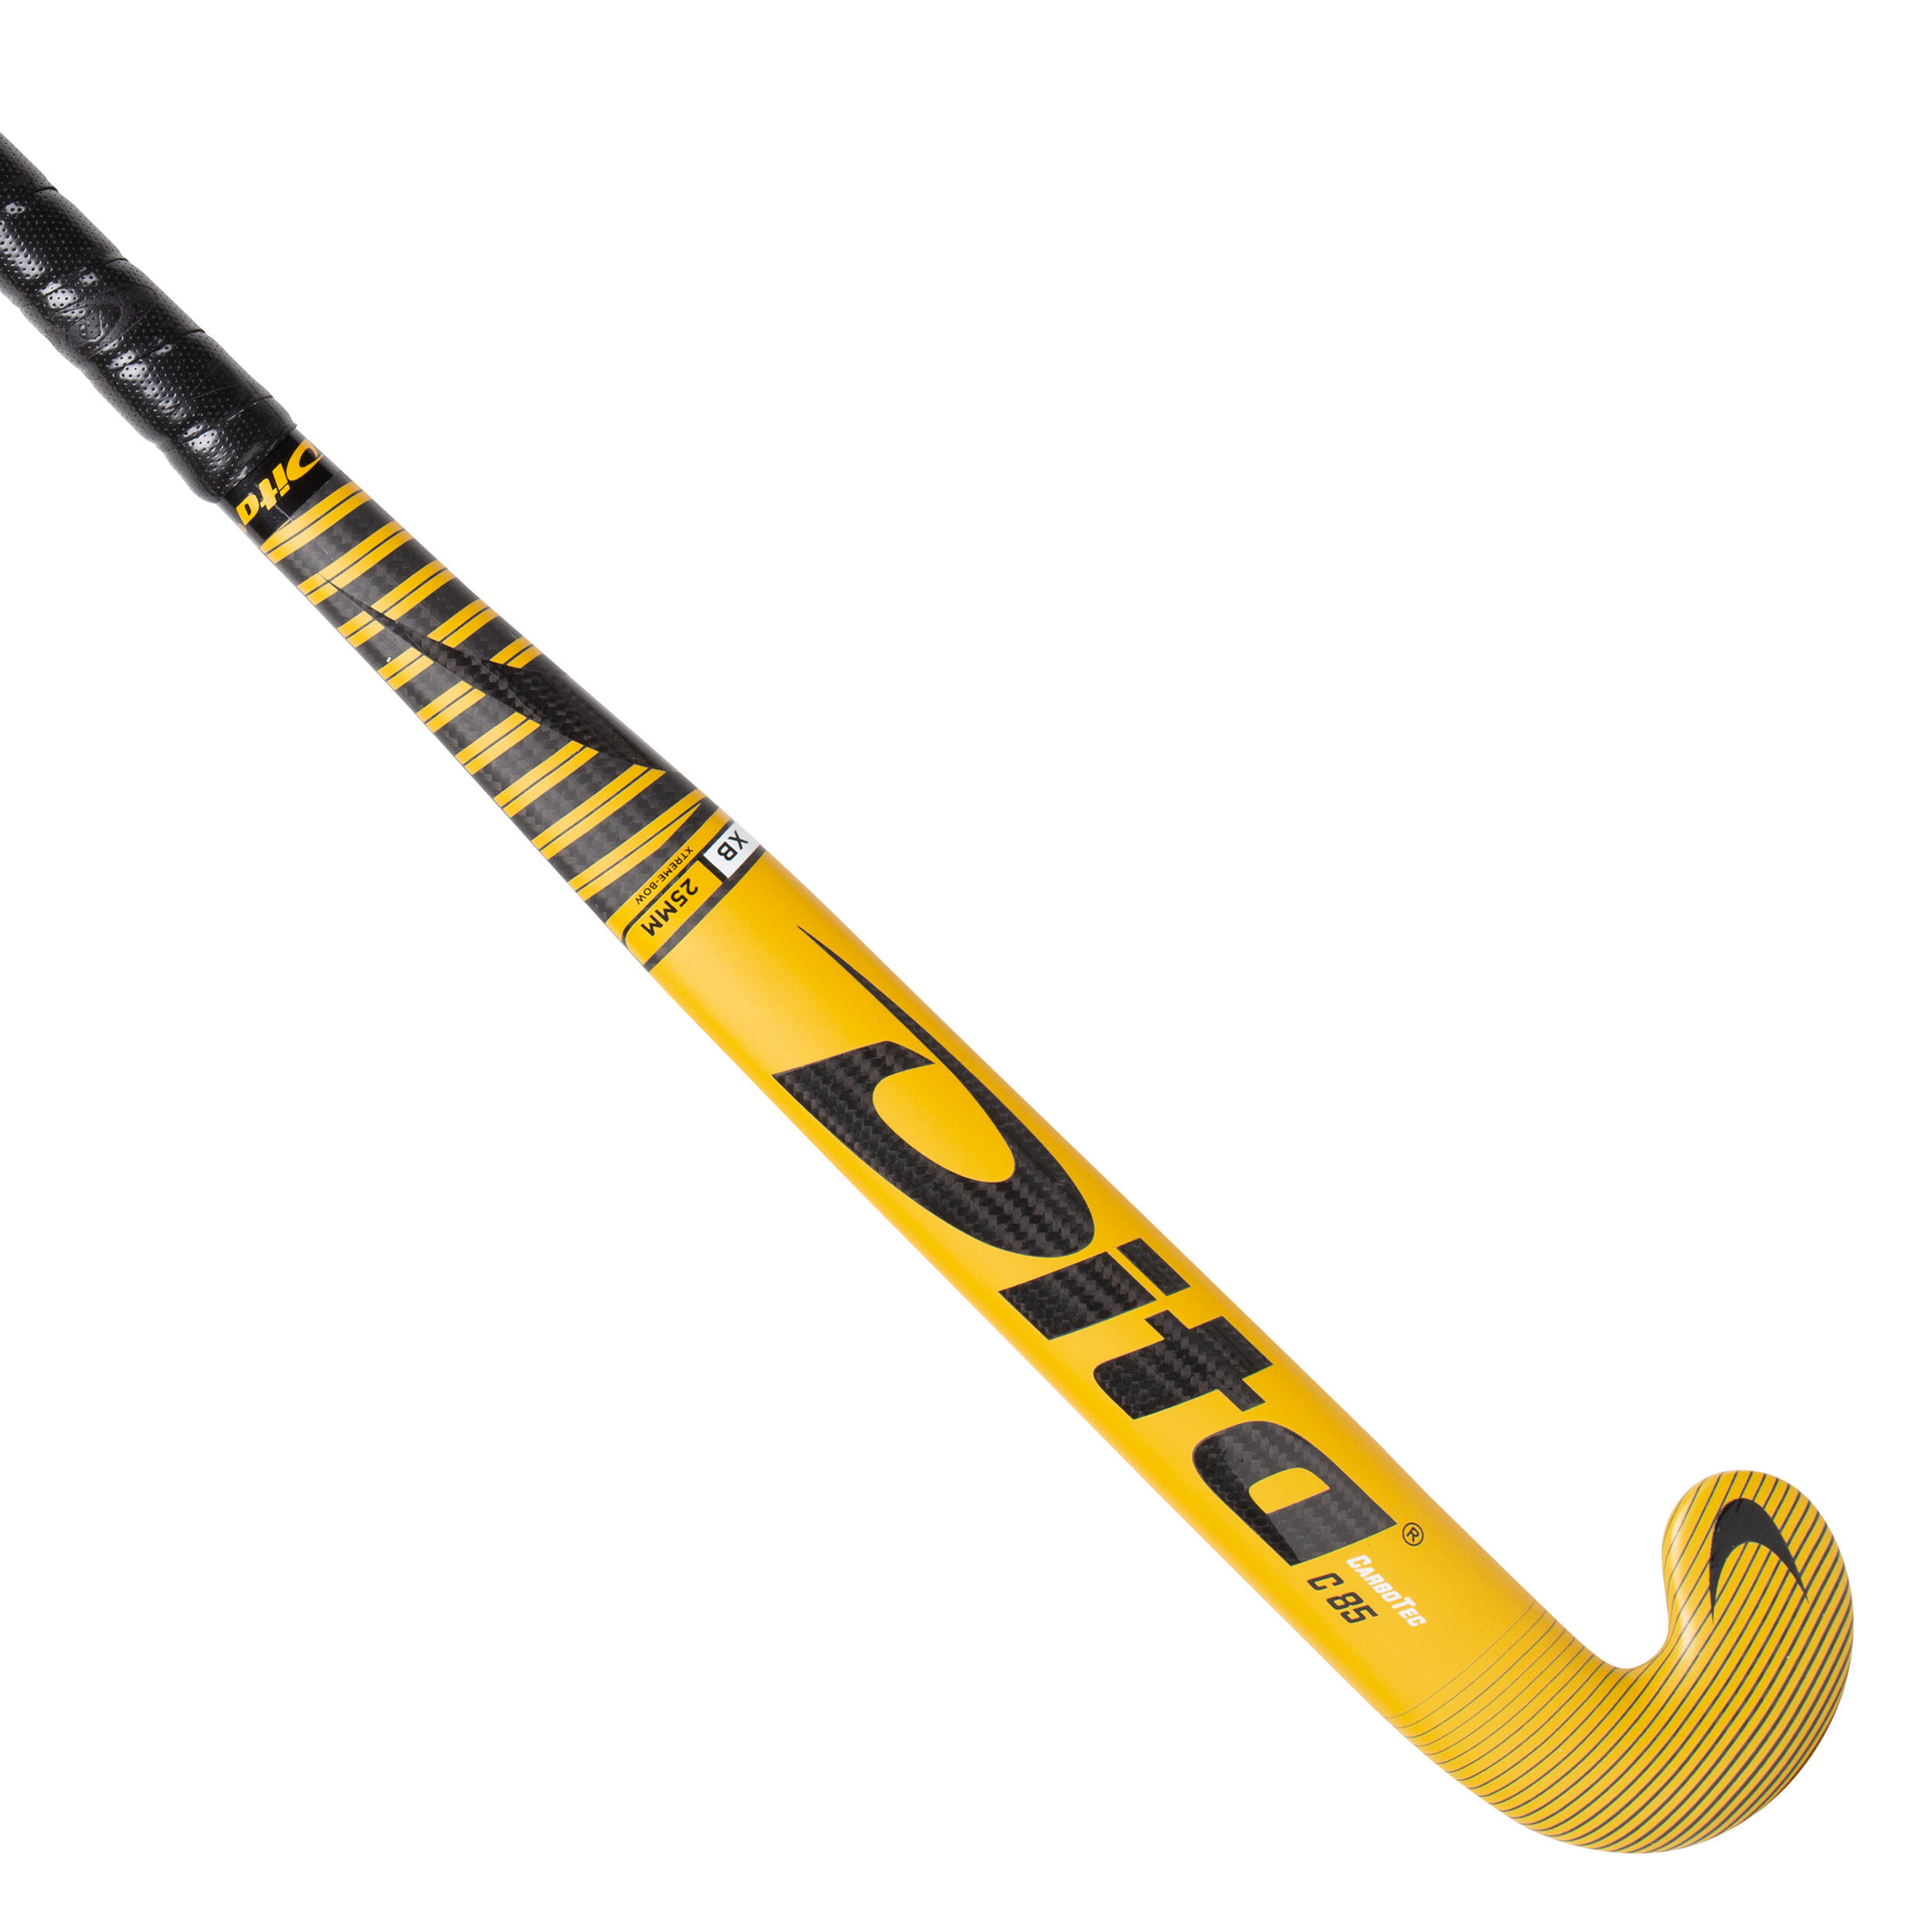 DITA Adult Advanced 85% Carbon X Low Bow Field Hockey Stick carbotecC85 - Gold/Black